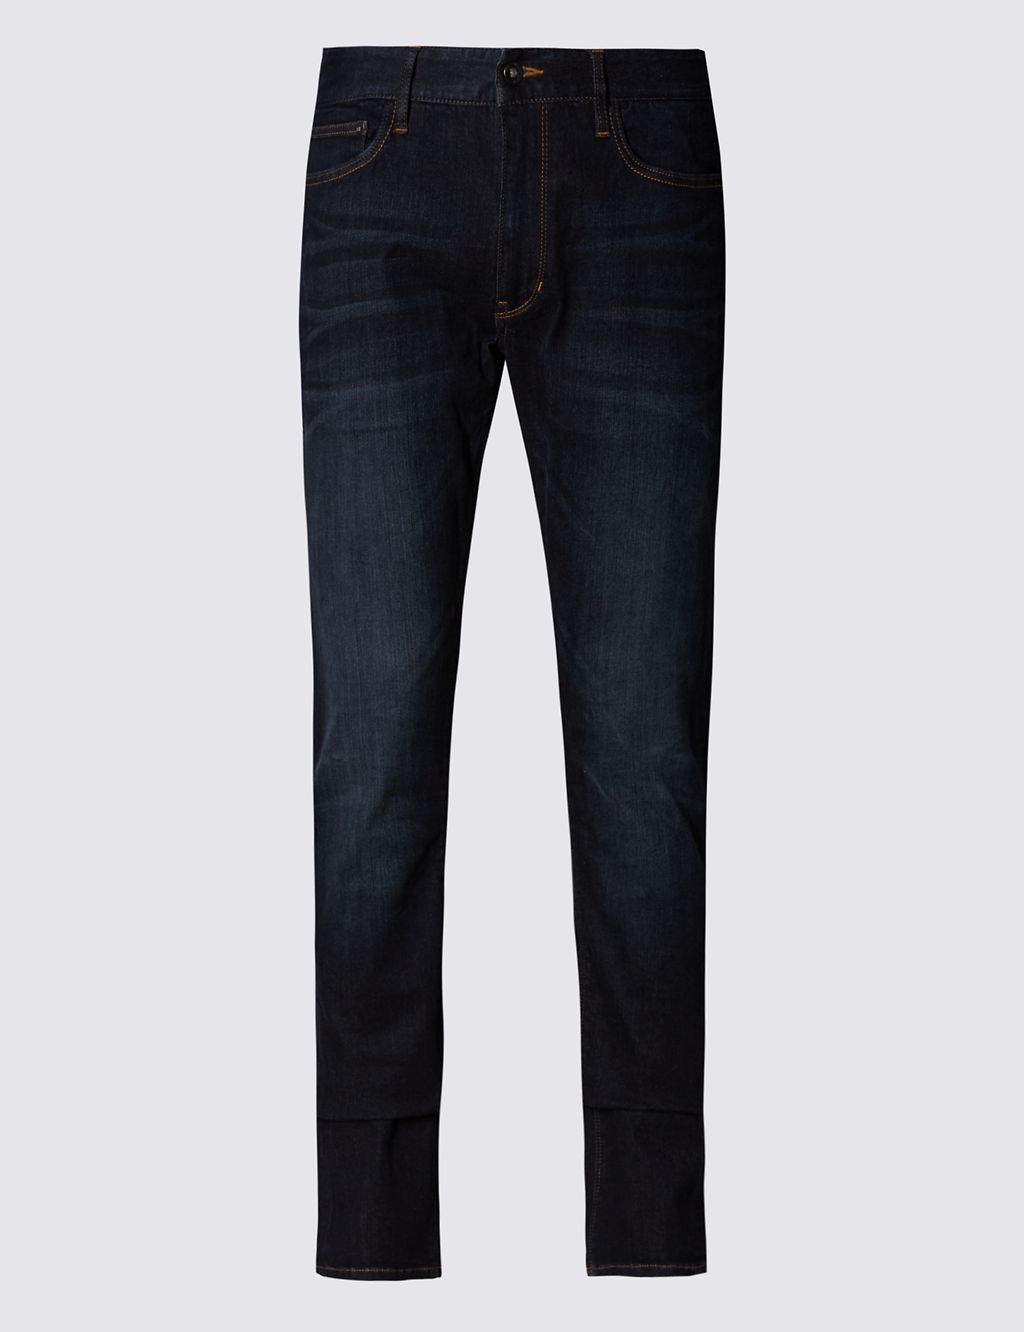 Slim Fit Stretch Jeans 1 of 4